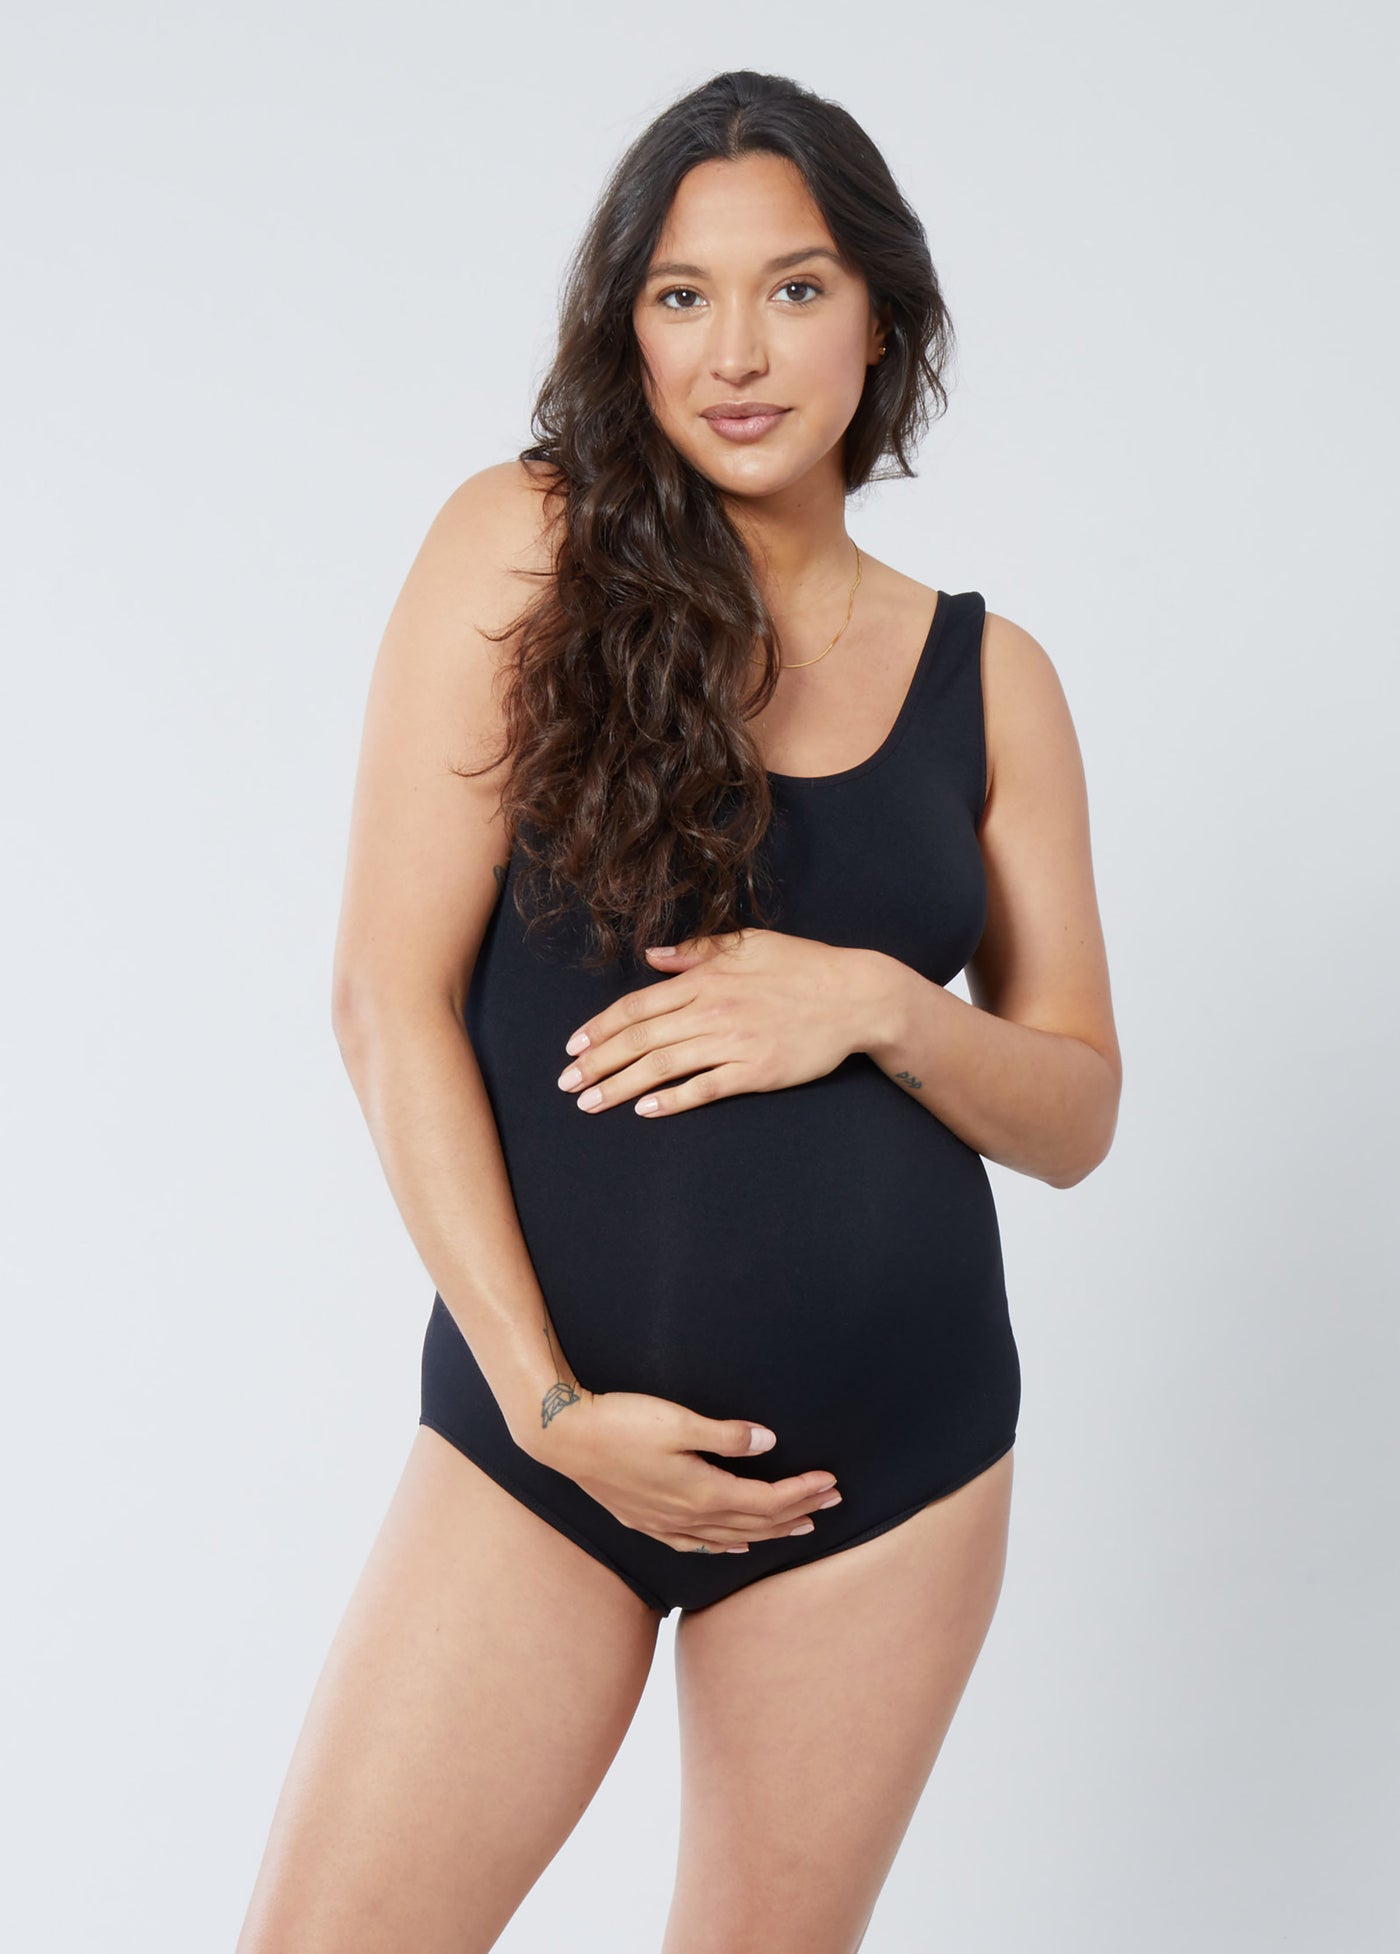 BreAuna is 7 months pregnant, 5'9" and wearing a size small||Black